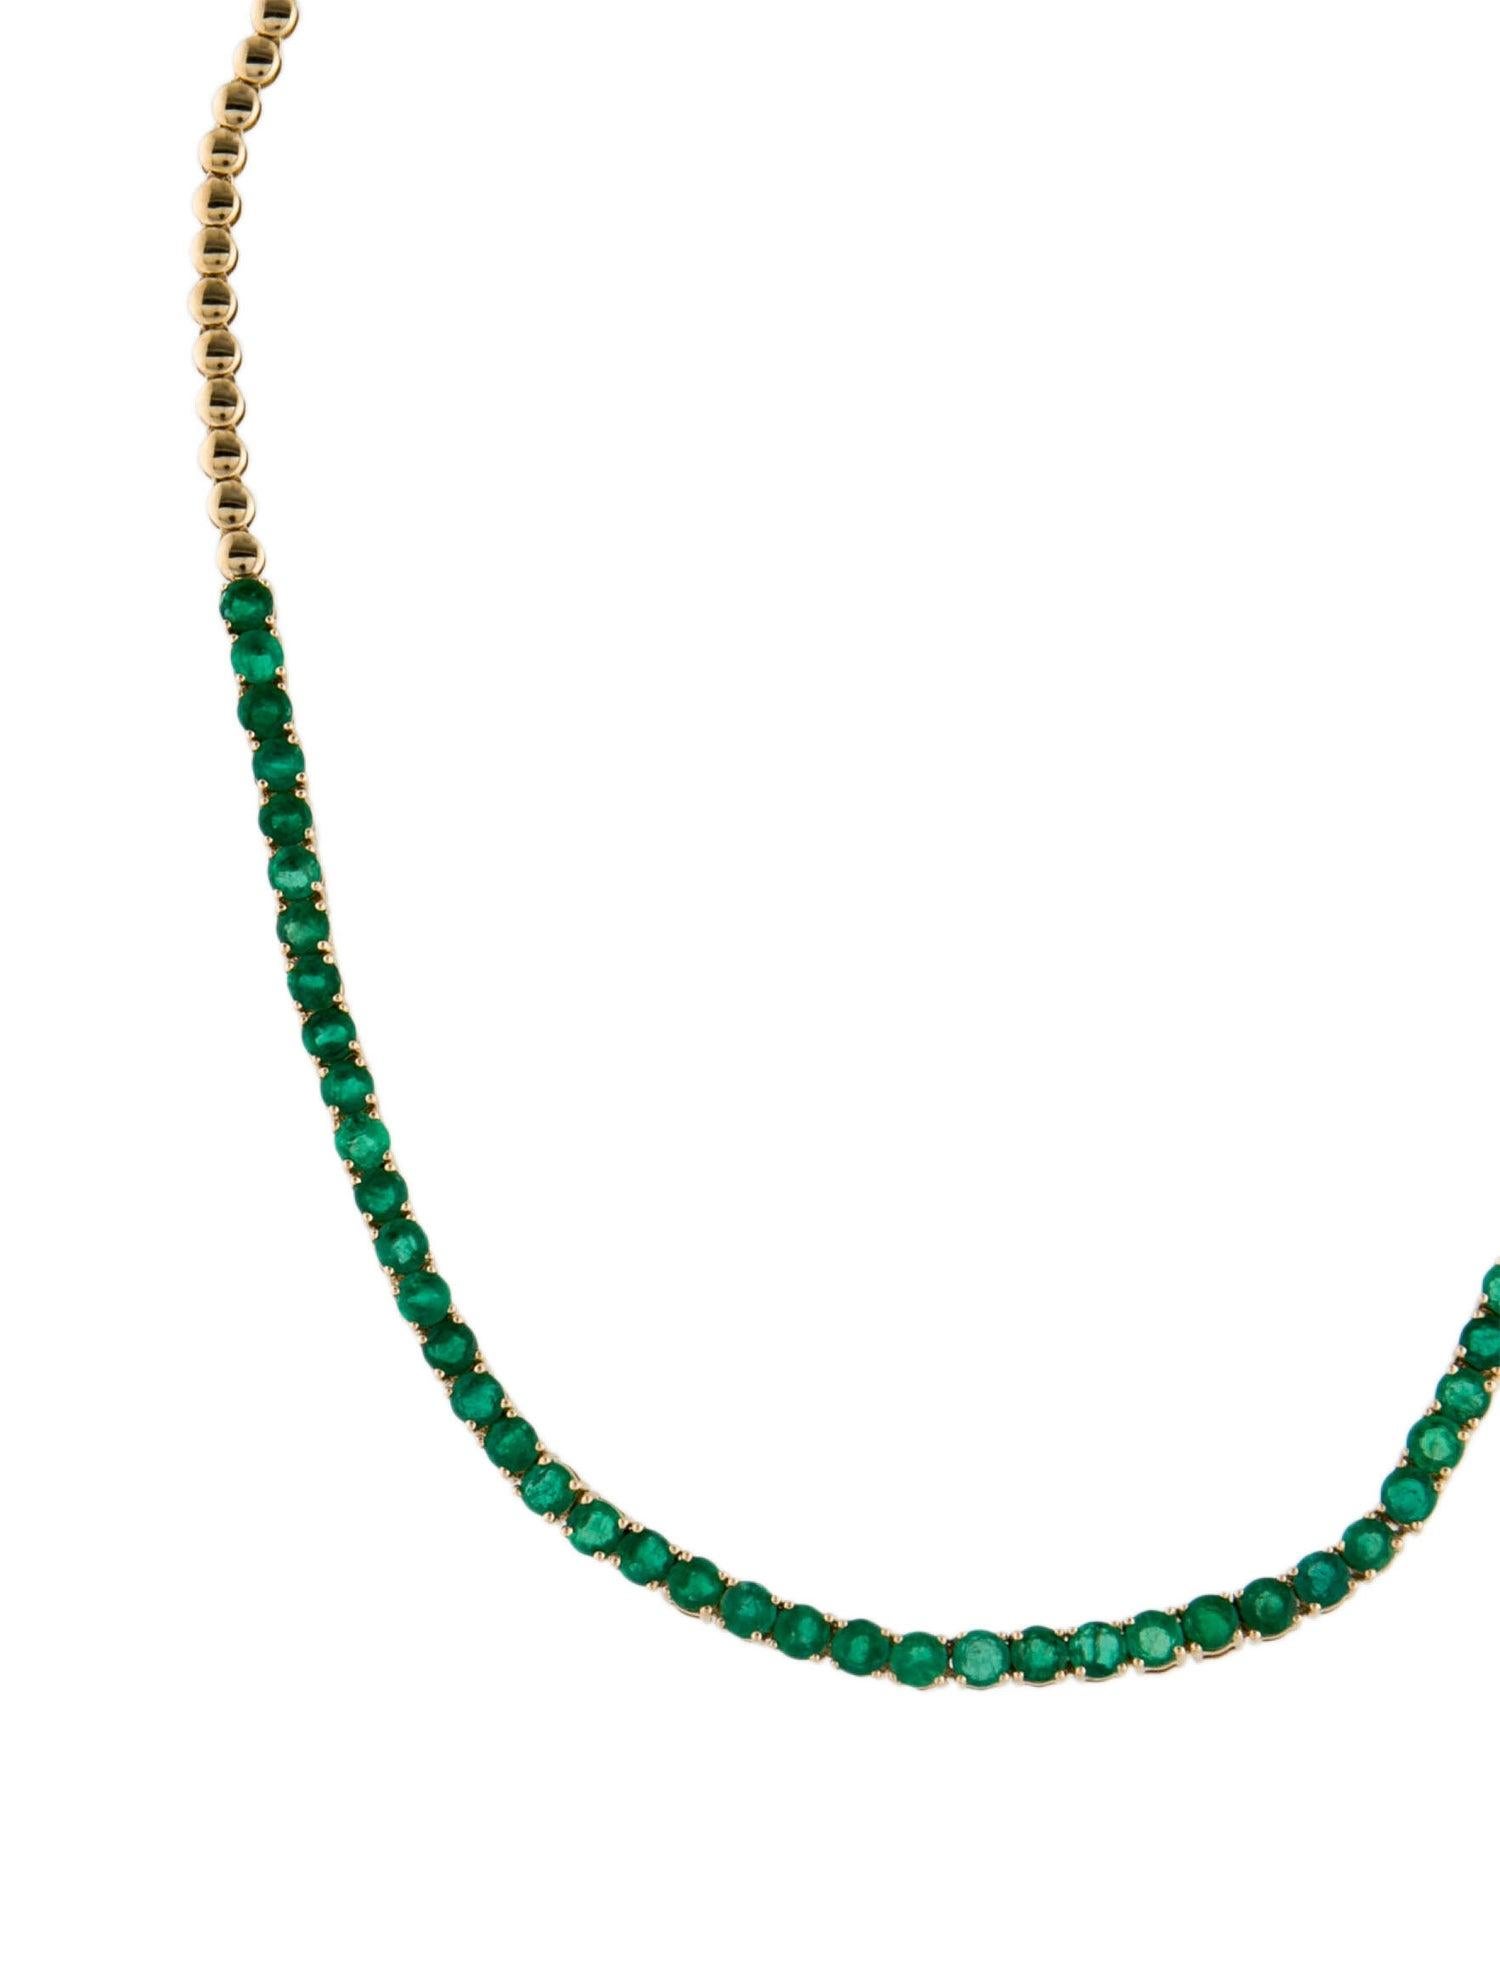 Luxury 14K Emerald Collar Necklace 7.90ctw  Elegant & Timeless Jewelry Piece In New Condition For Sale In Holtsville, NY